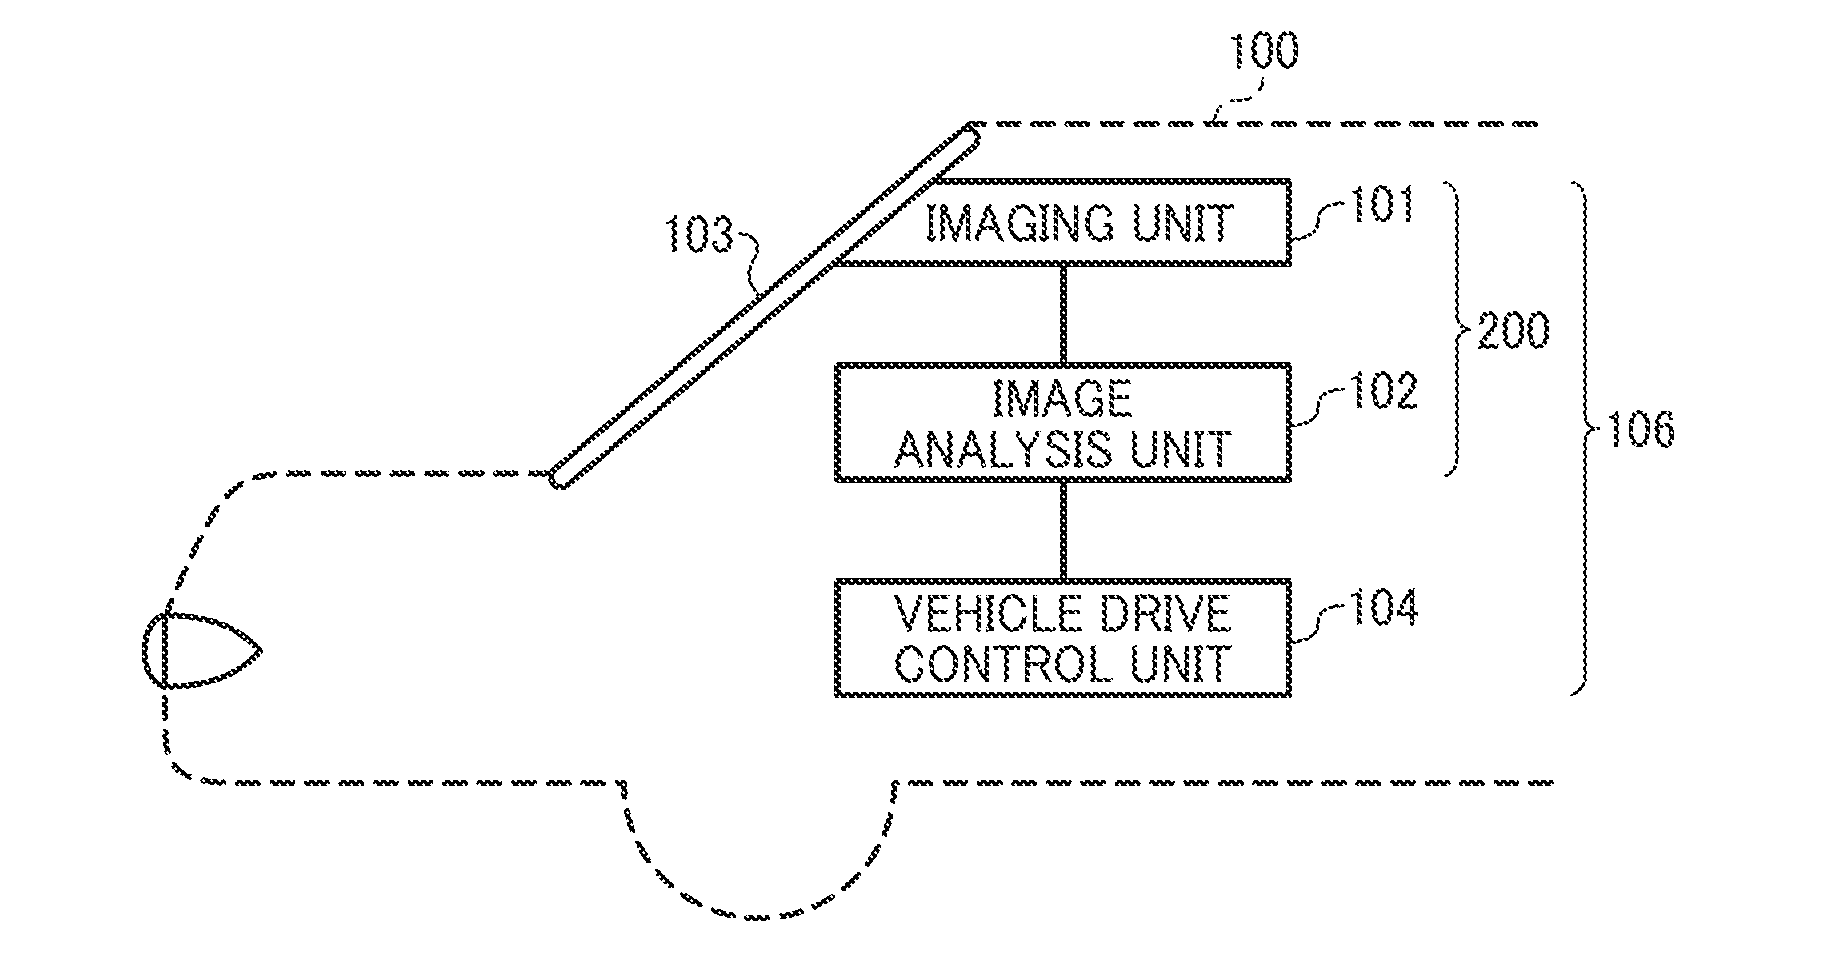 Target recognition system and target recognition method executed by the target recognition system